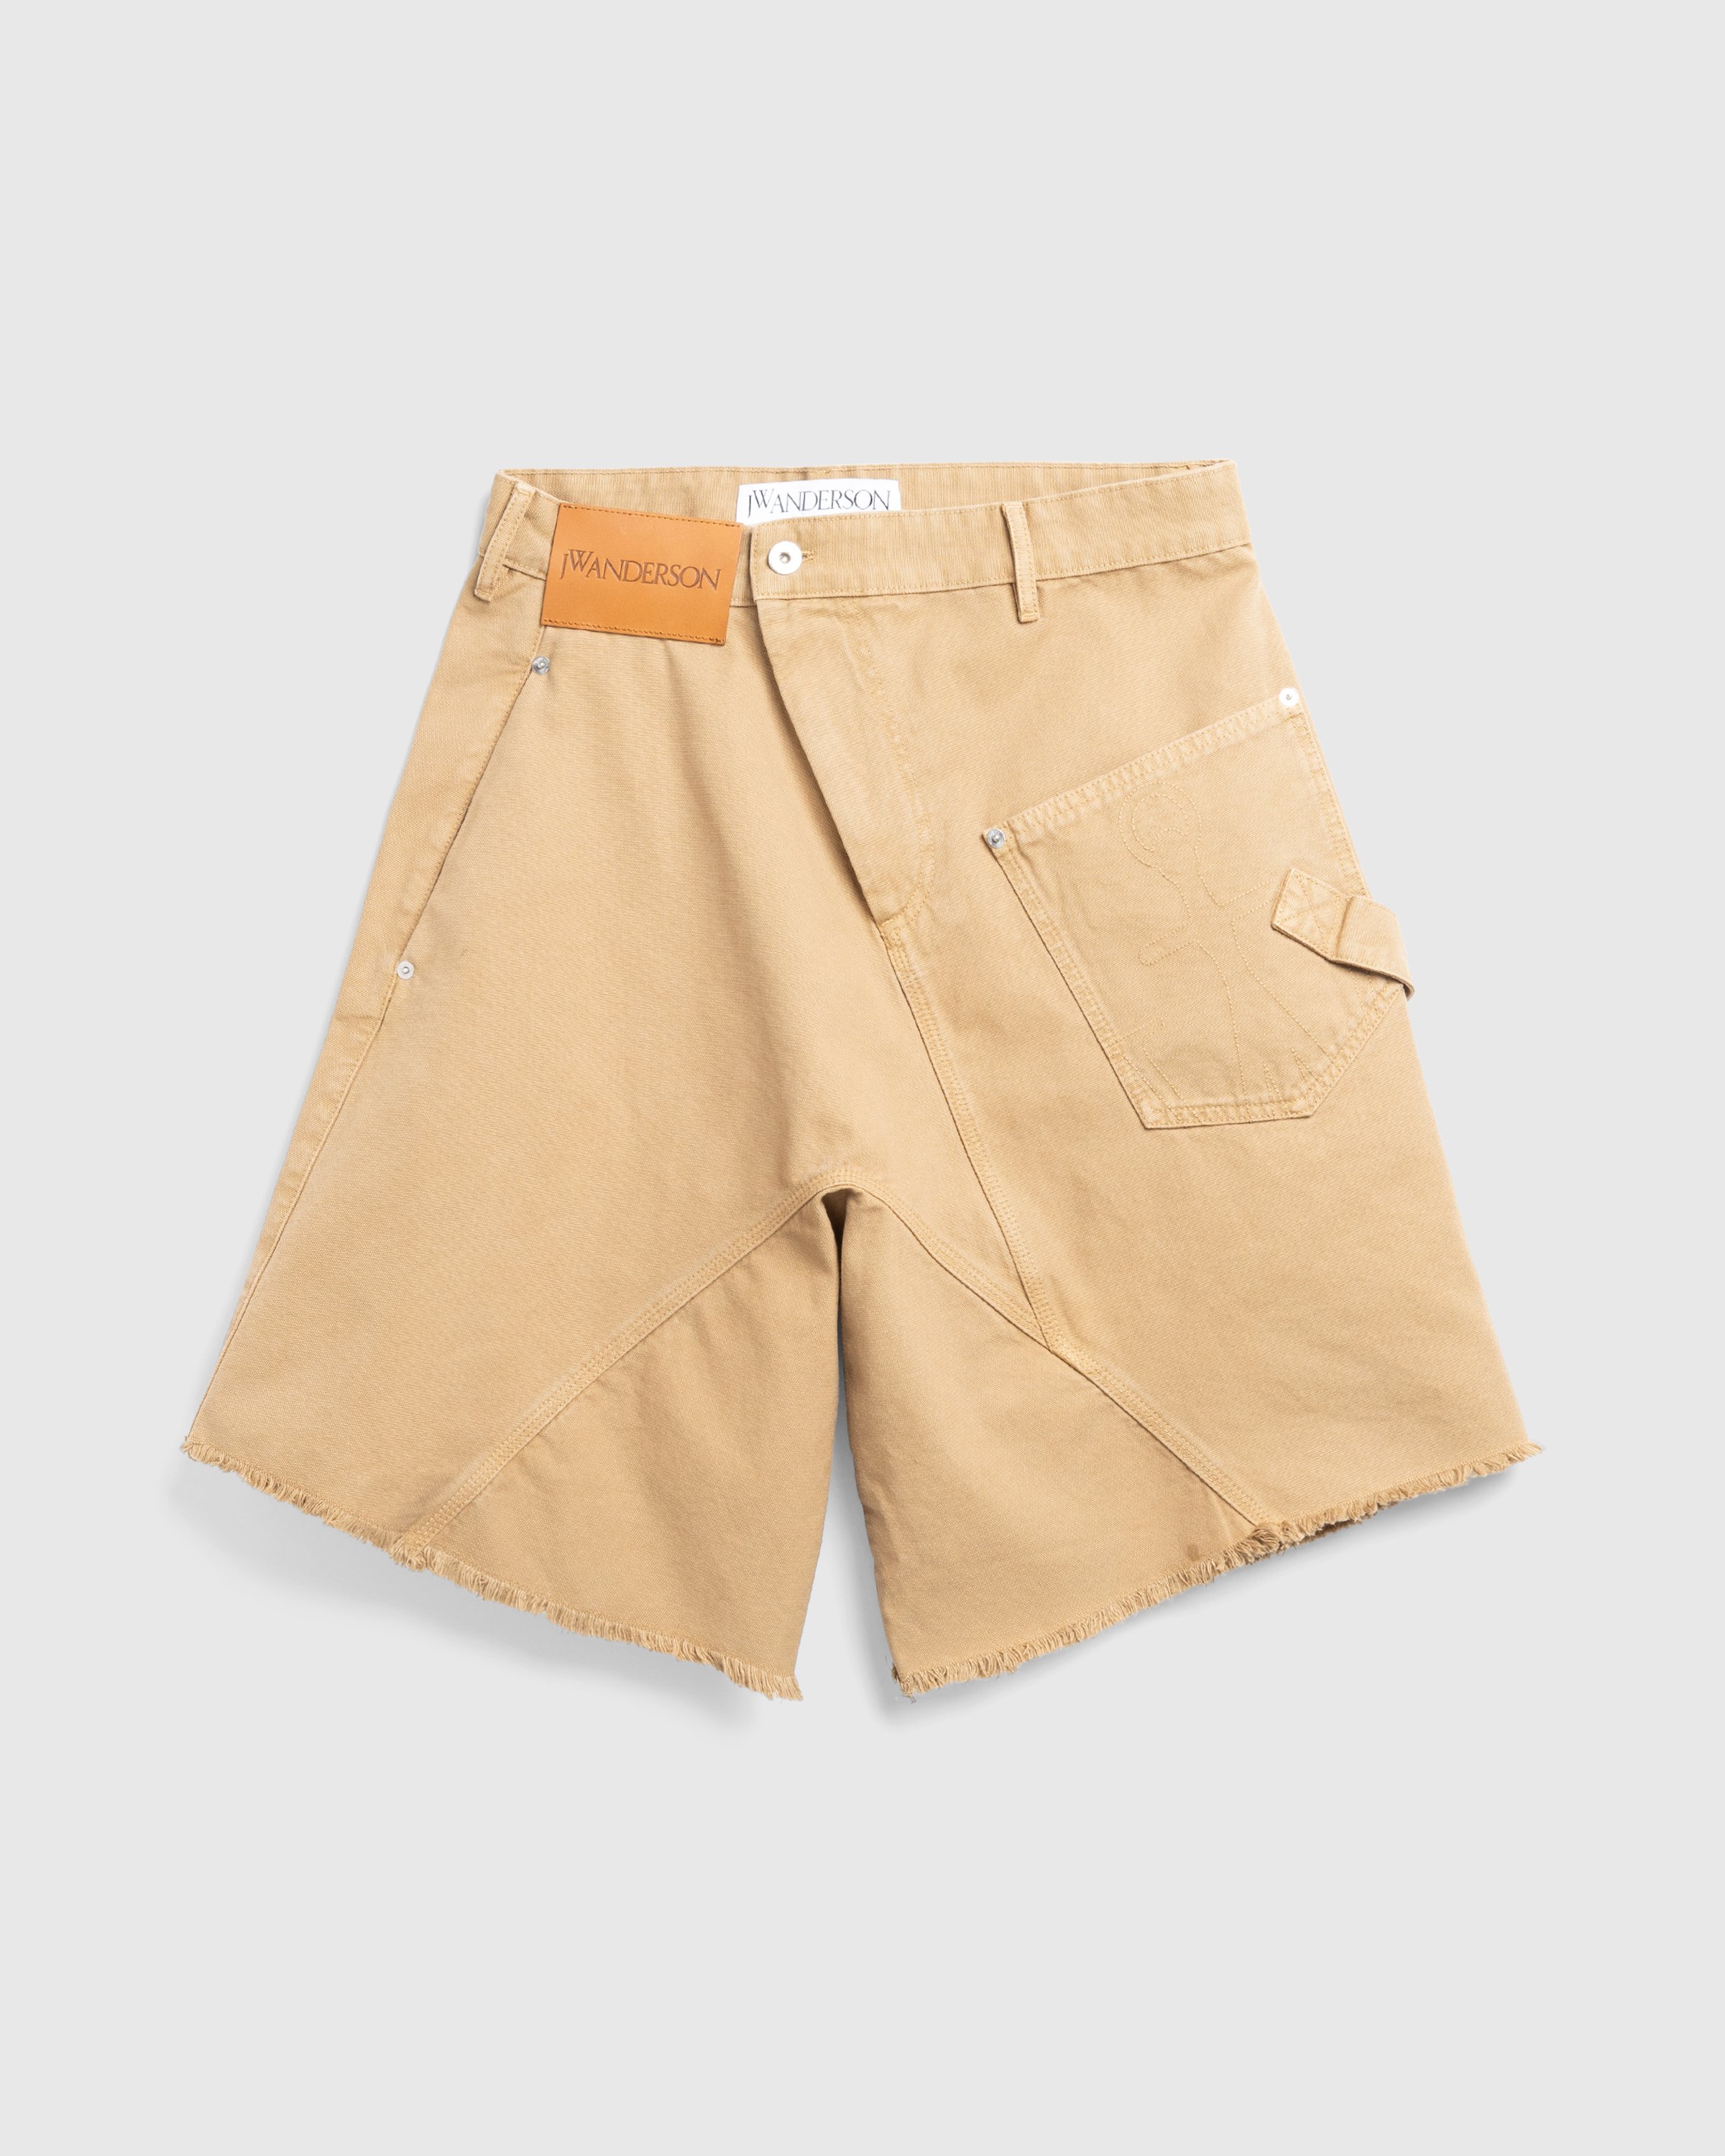 J.W. Anderson - TWISTED WORKWEAR SHORTS - Clothing - Beige - Image 1